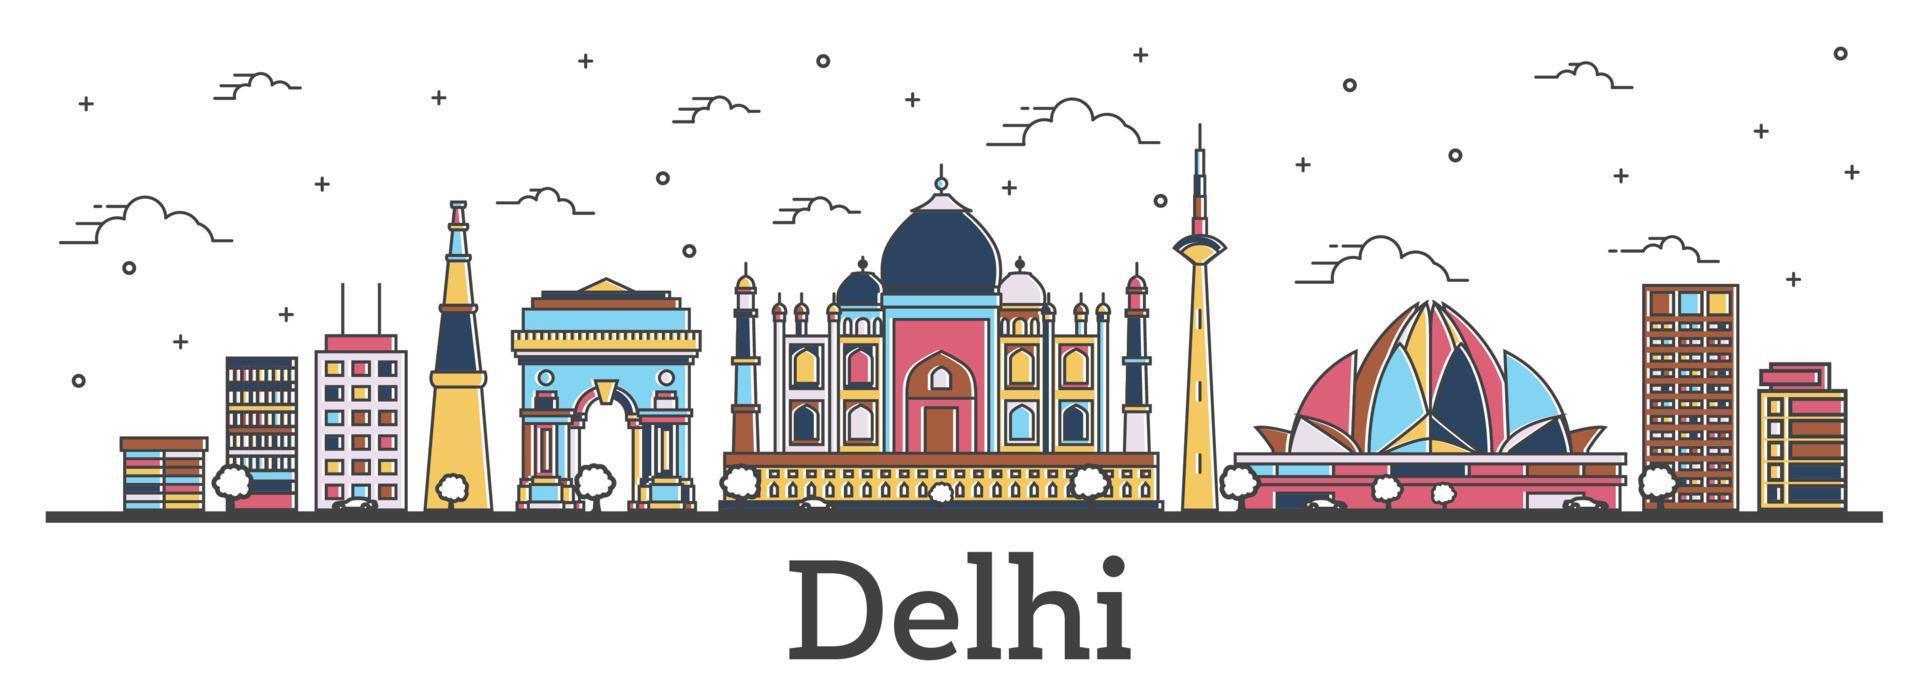 Outline Delhi India City Skyline with Color Buildings Isolated on White. vector